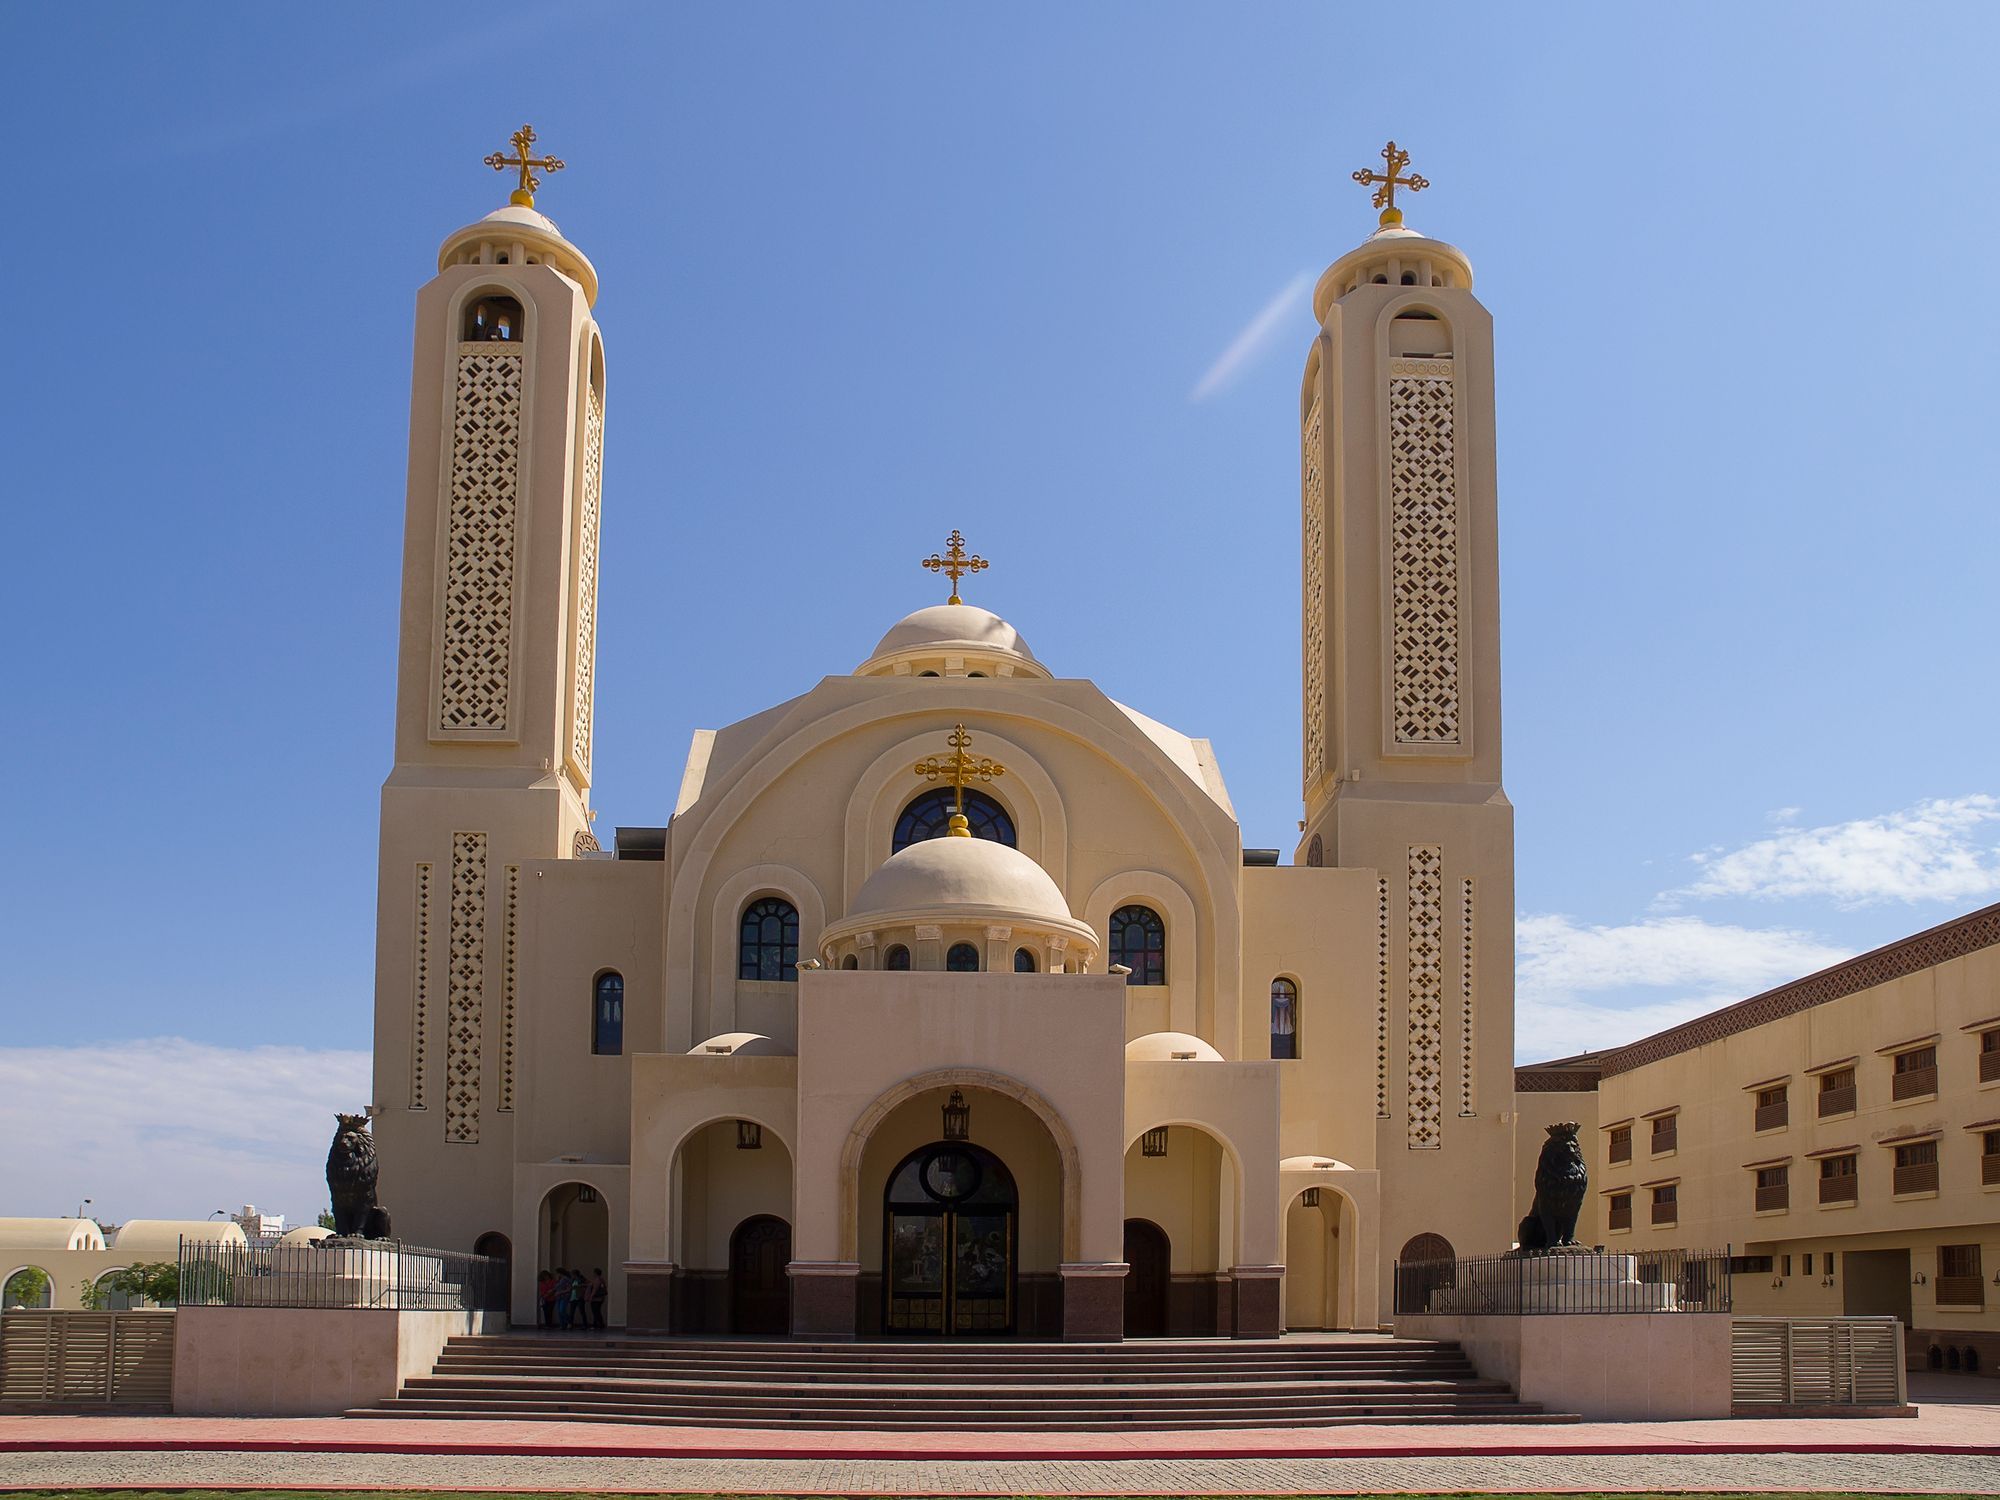 After reporting sexual abuse allegations to church leaders for 17 years got her nowhere, a woman captured the Coptic Church's attention via social media.